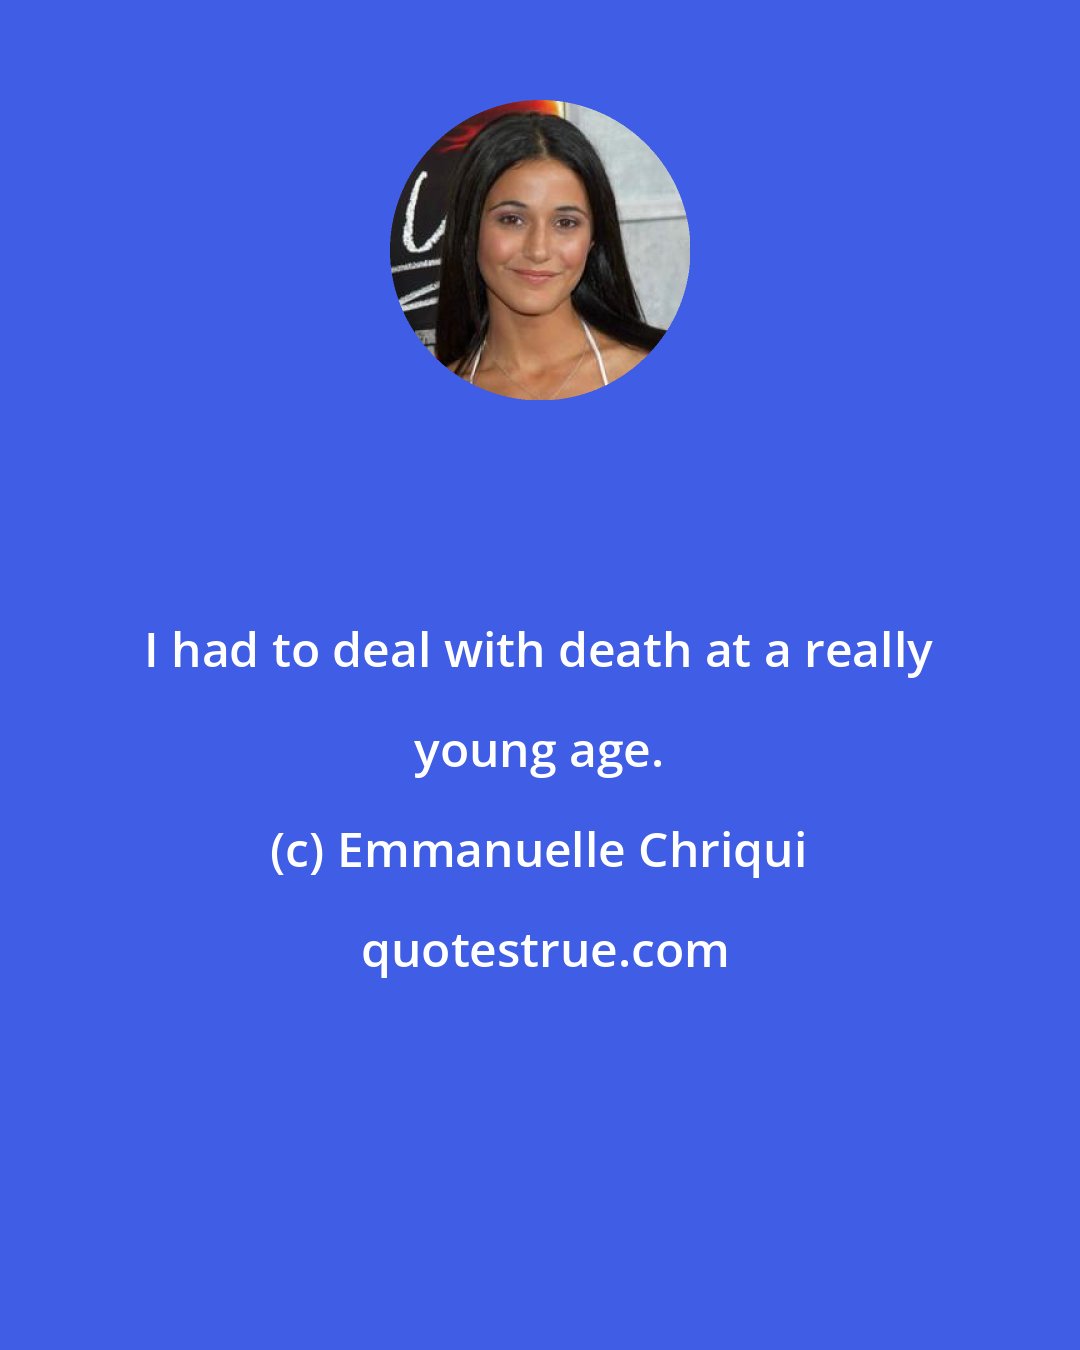 Emmanuelle Chriqui: I had to deal with death at a really young age.